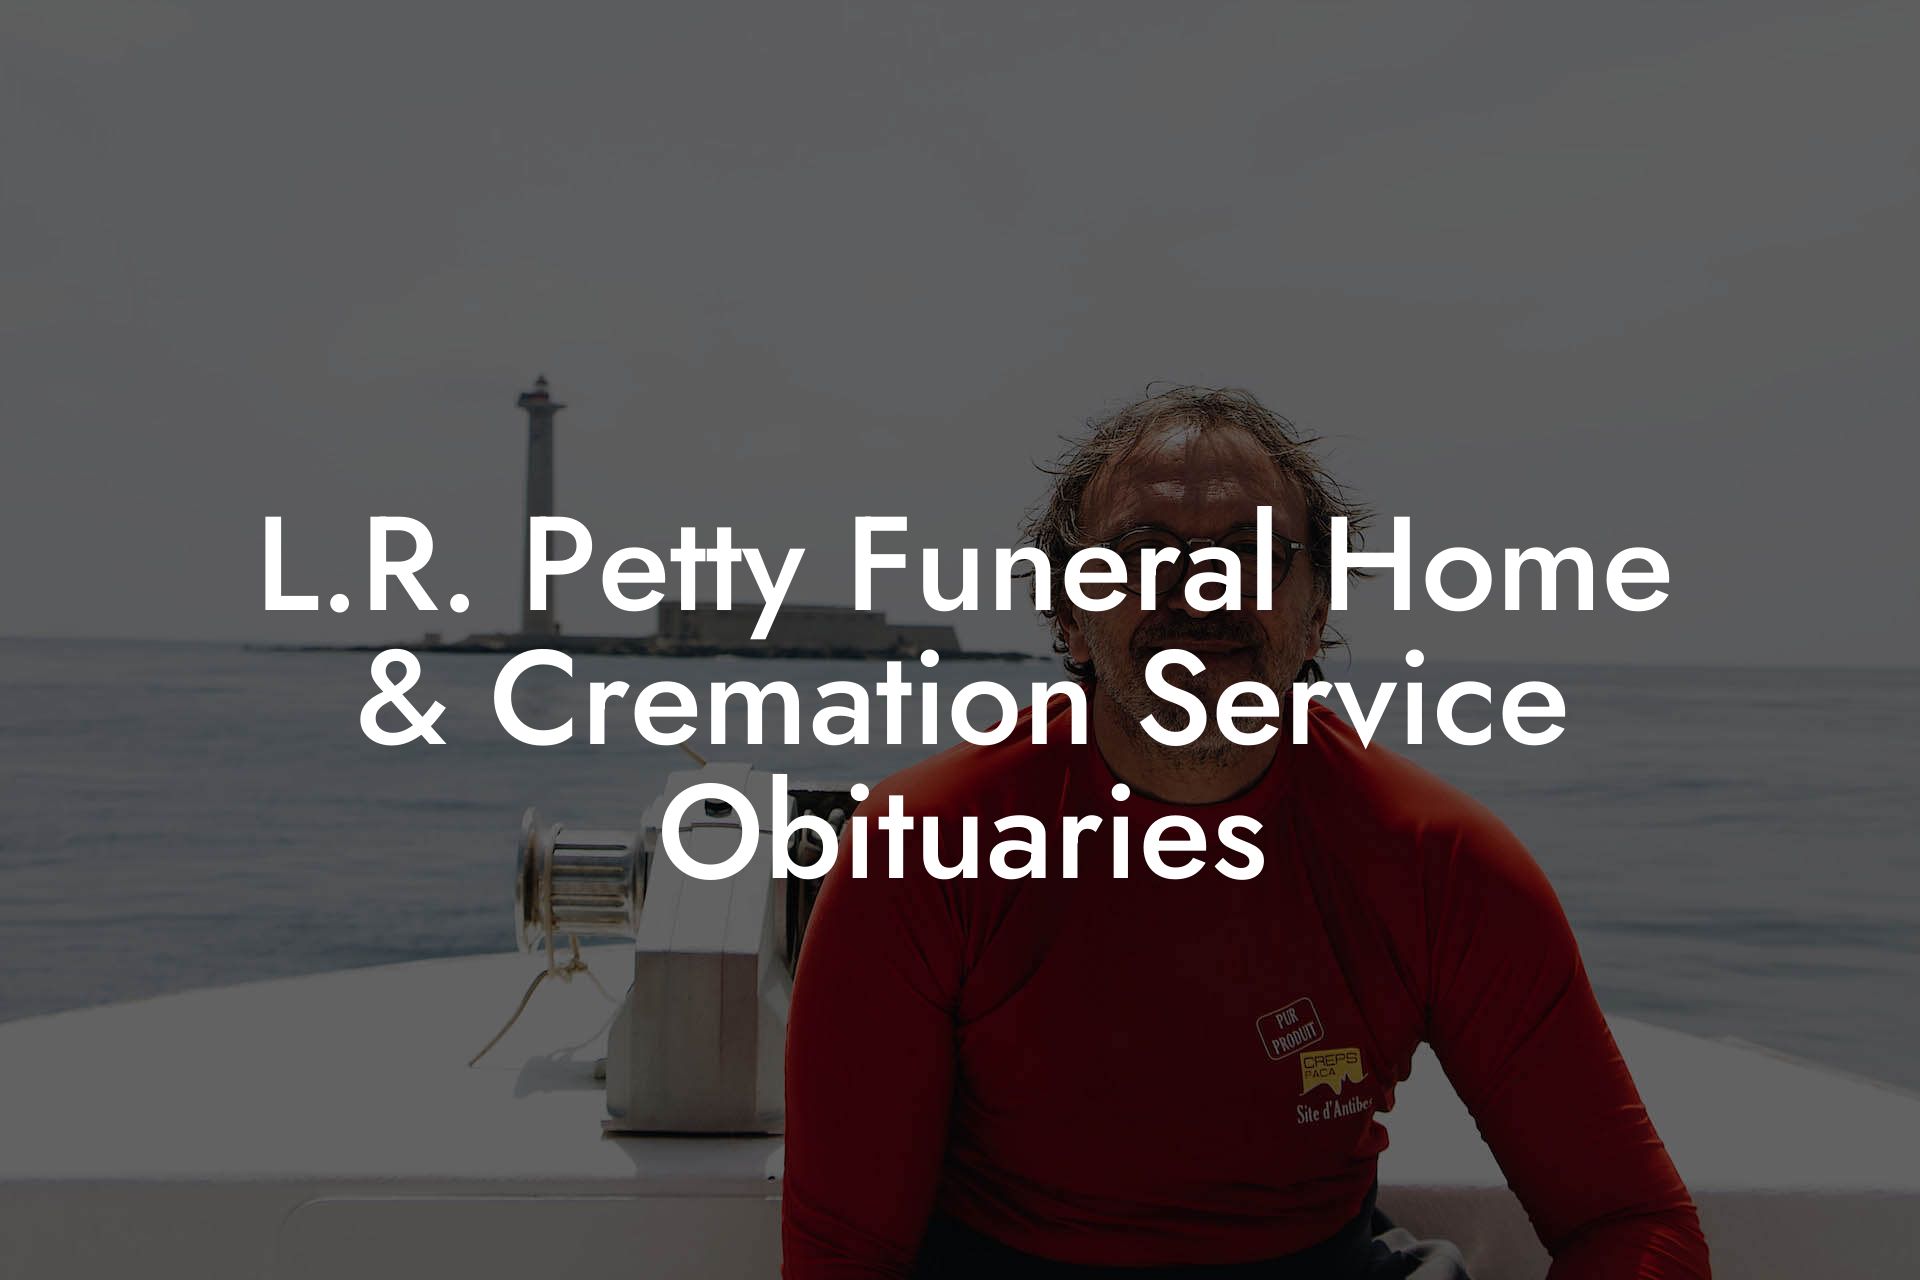 L.R. Petty Funeral Home & Cremation Service Obituaries